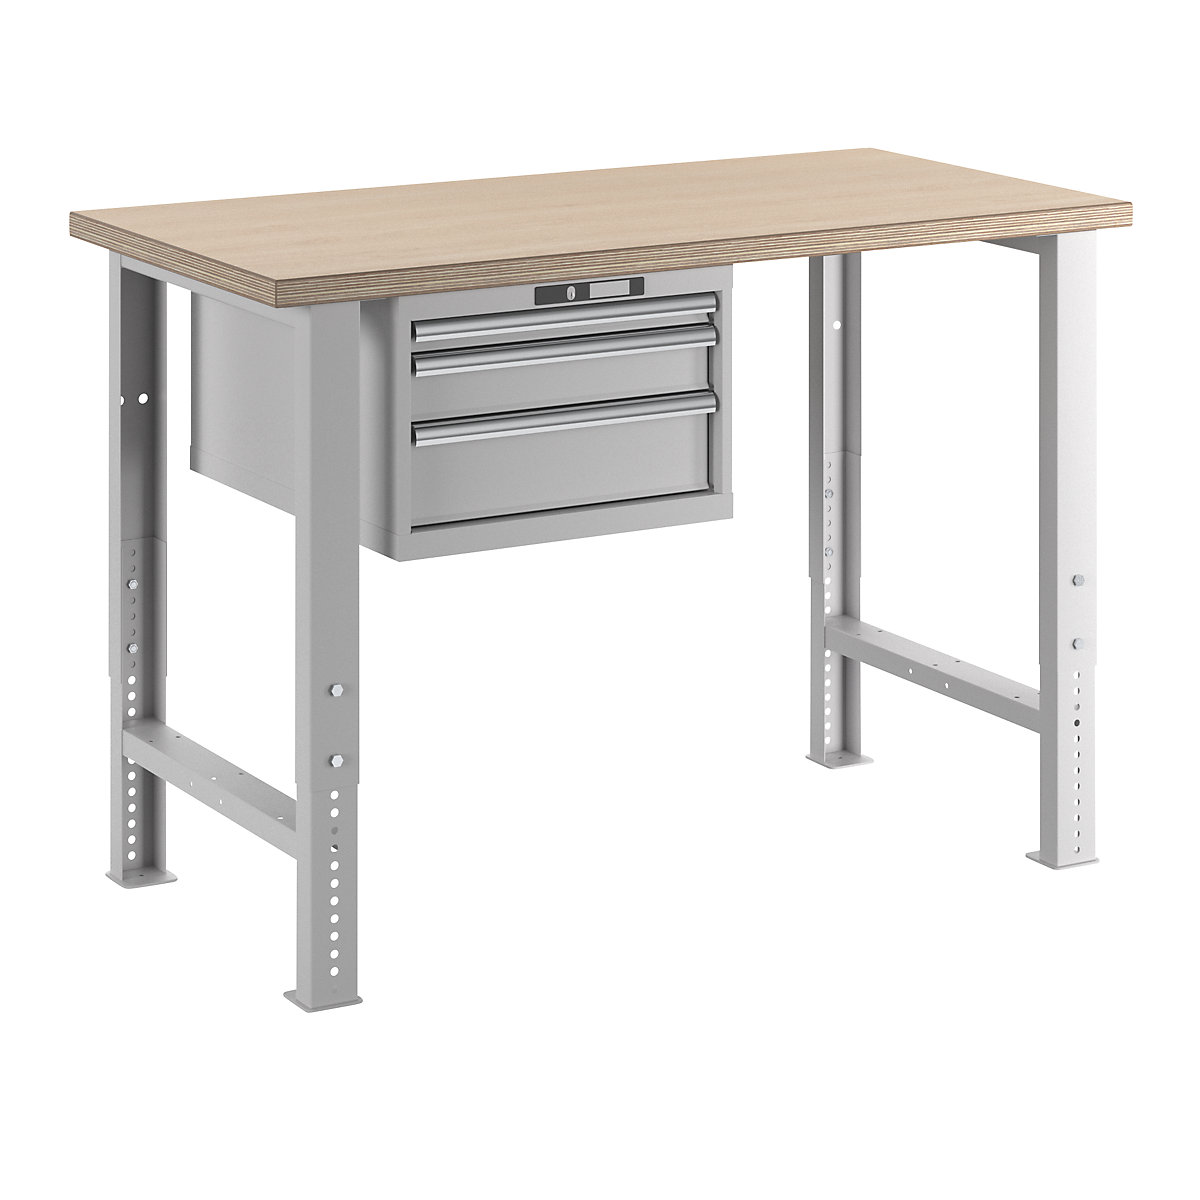 Modular workbench – LISTA, height 740 – 1090 mm, suspended drawer unit, 3 drawers, light grey, table width 1500 mm-7